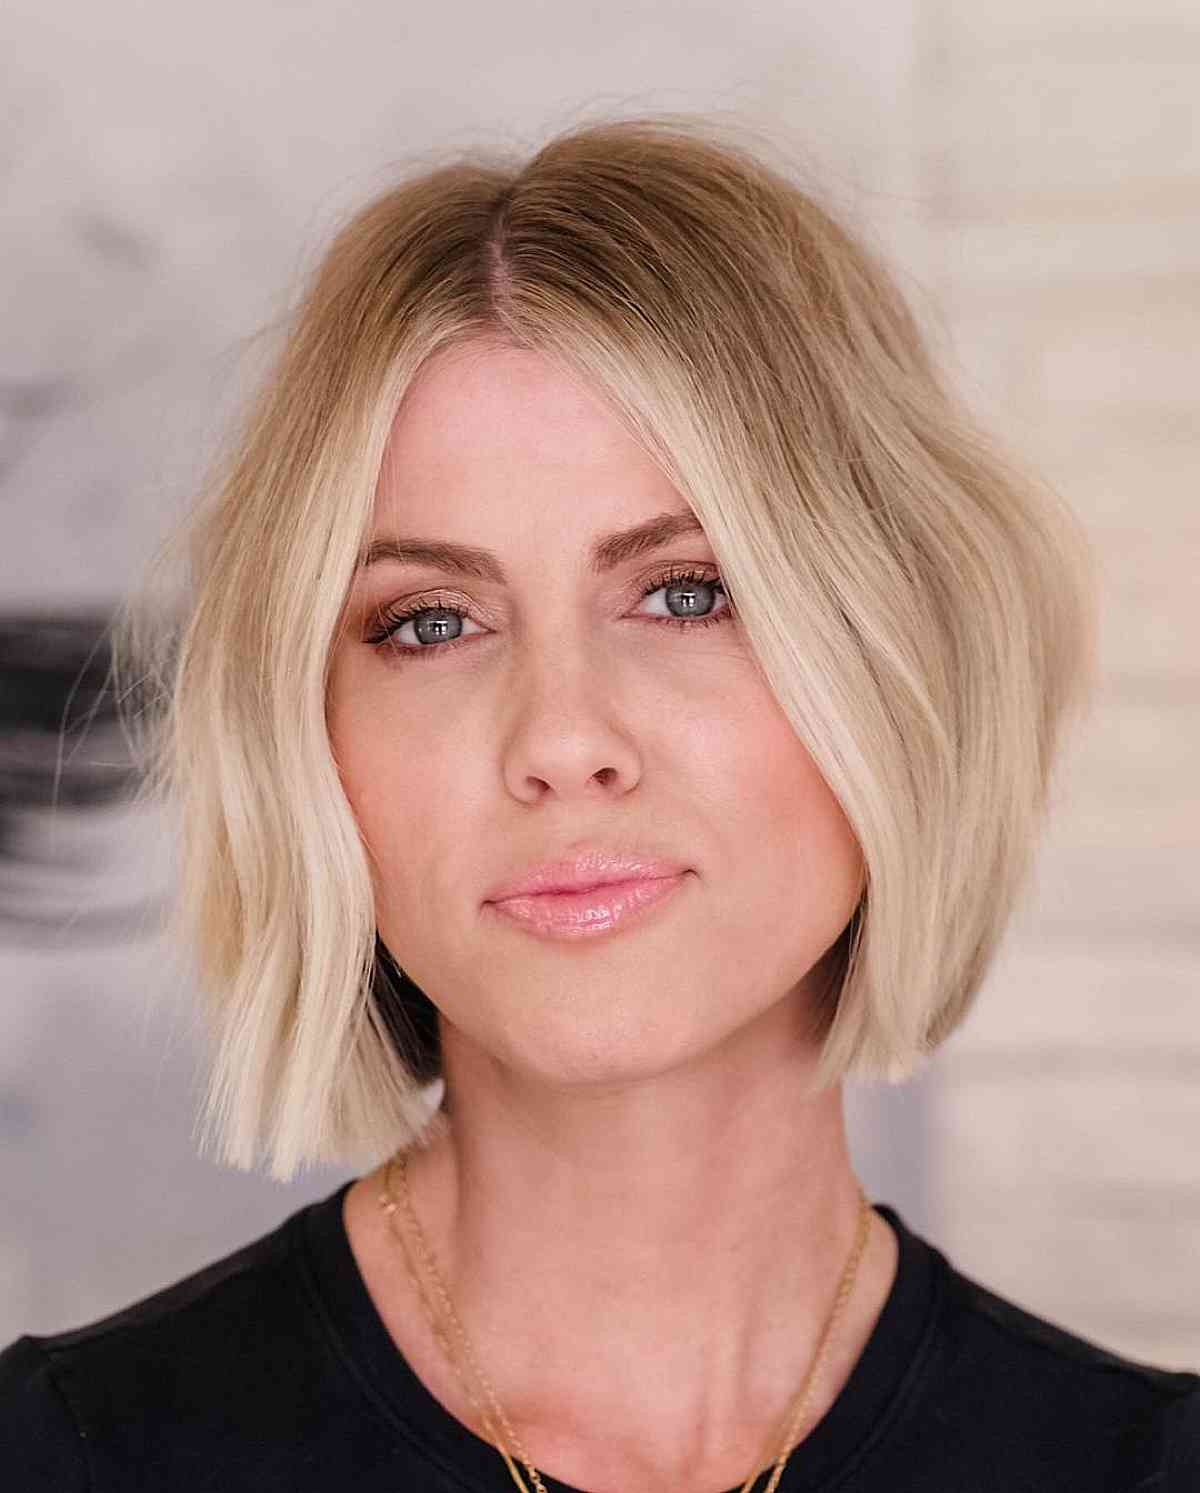 Chic Short Blunt Cut Bob with Baby Waves